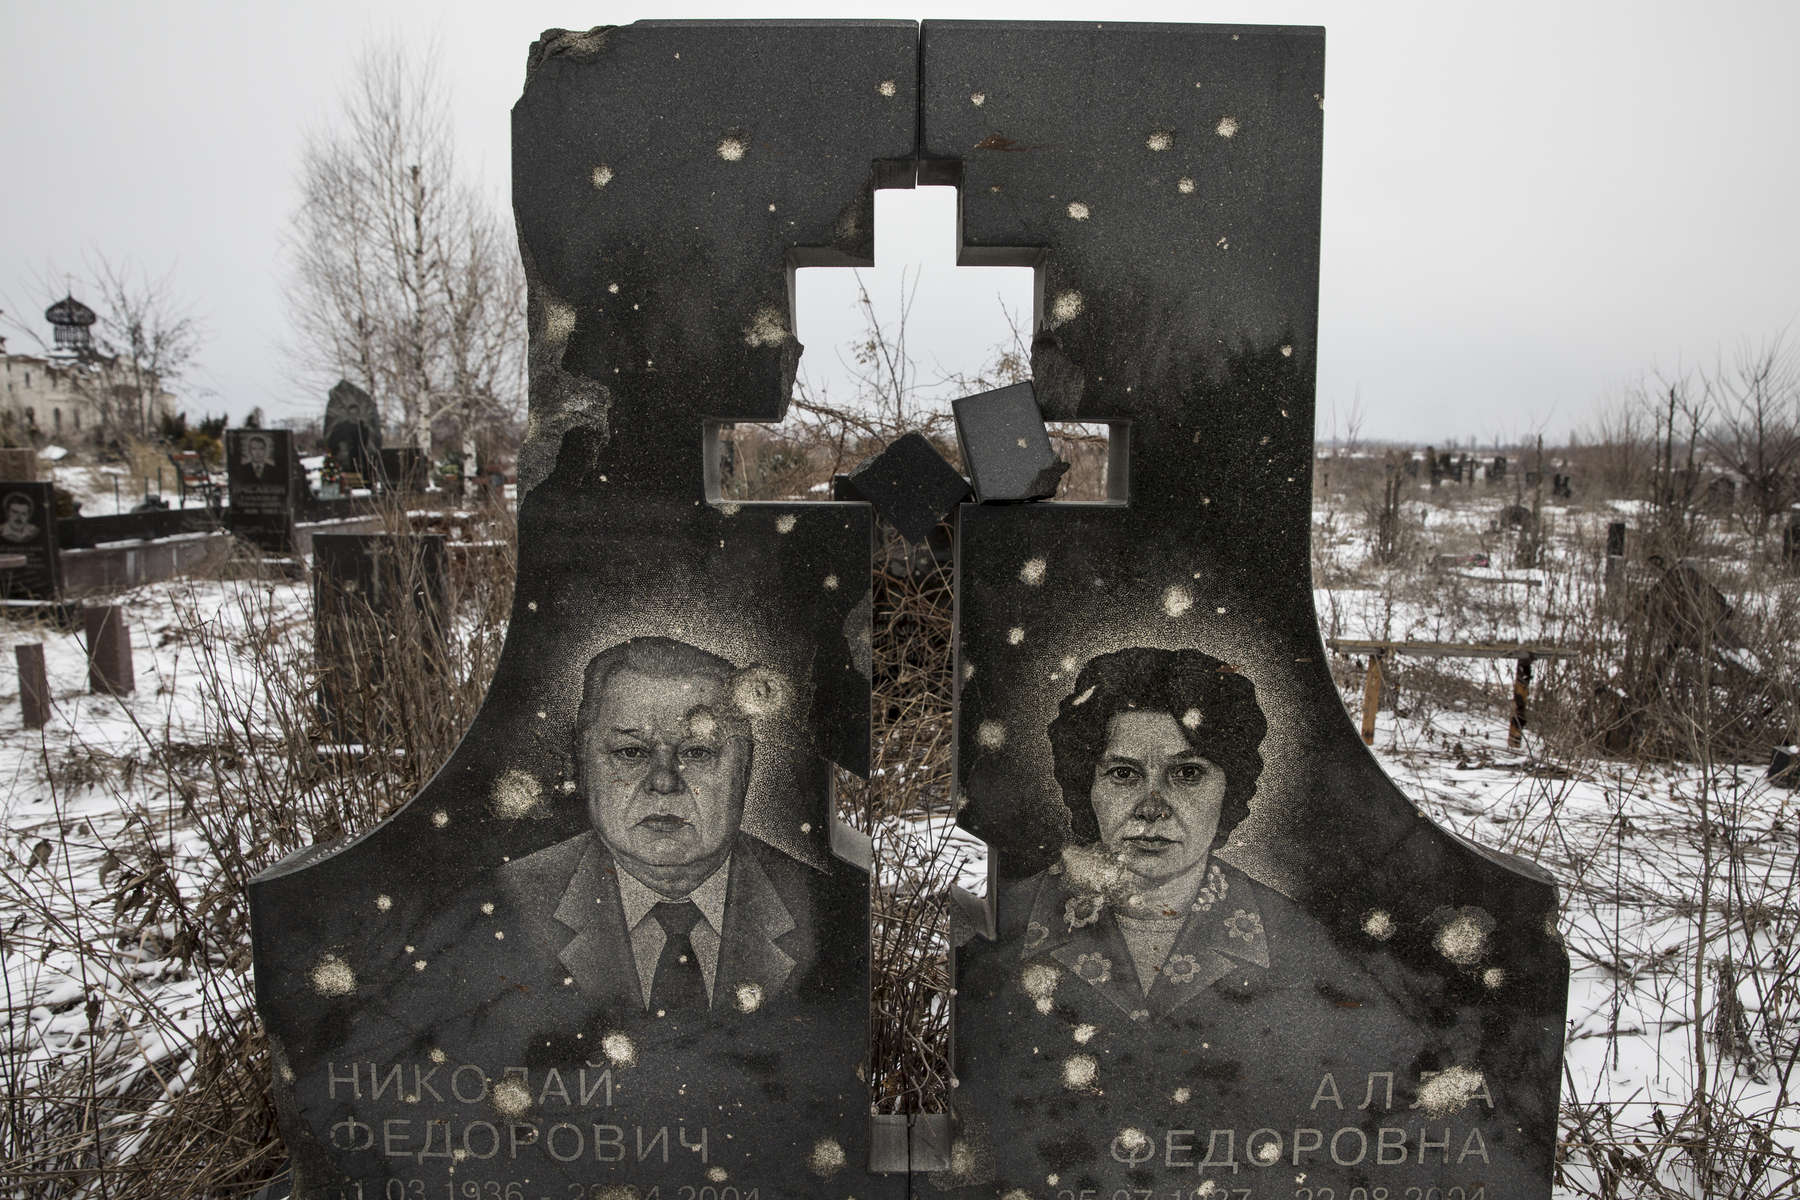 A war-torn cemetery full of tombstones that have been hit by gunfire at the devastated neighborhood near the Donetsk airport.After more than four years of war the armed conflict in eastern Ukraine has a human toll that is staggering. The war has displaced more than 1.6 million with over 2,500 civilians killed and 9,000 injured. Some 200,000 people live under constant fear of shelling every day, with nearly a third of the 3.4 million people in need of humanitarian assistance over 60 years of age. Ukraine has the highest proportion of elderly affected by war in the world.